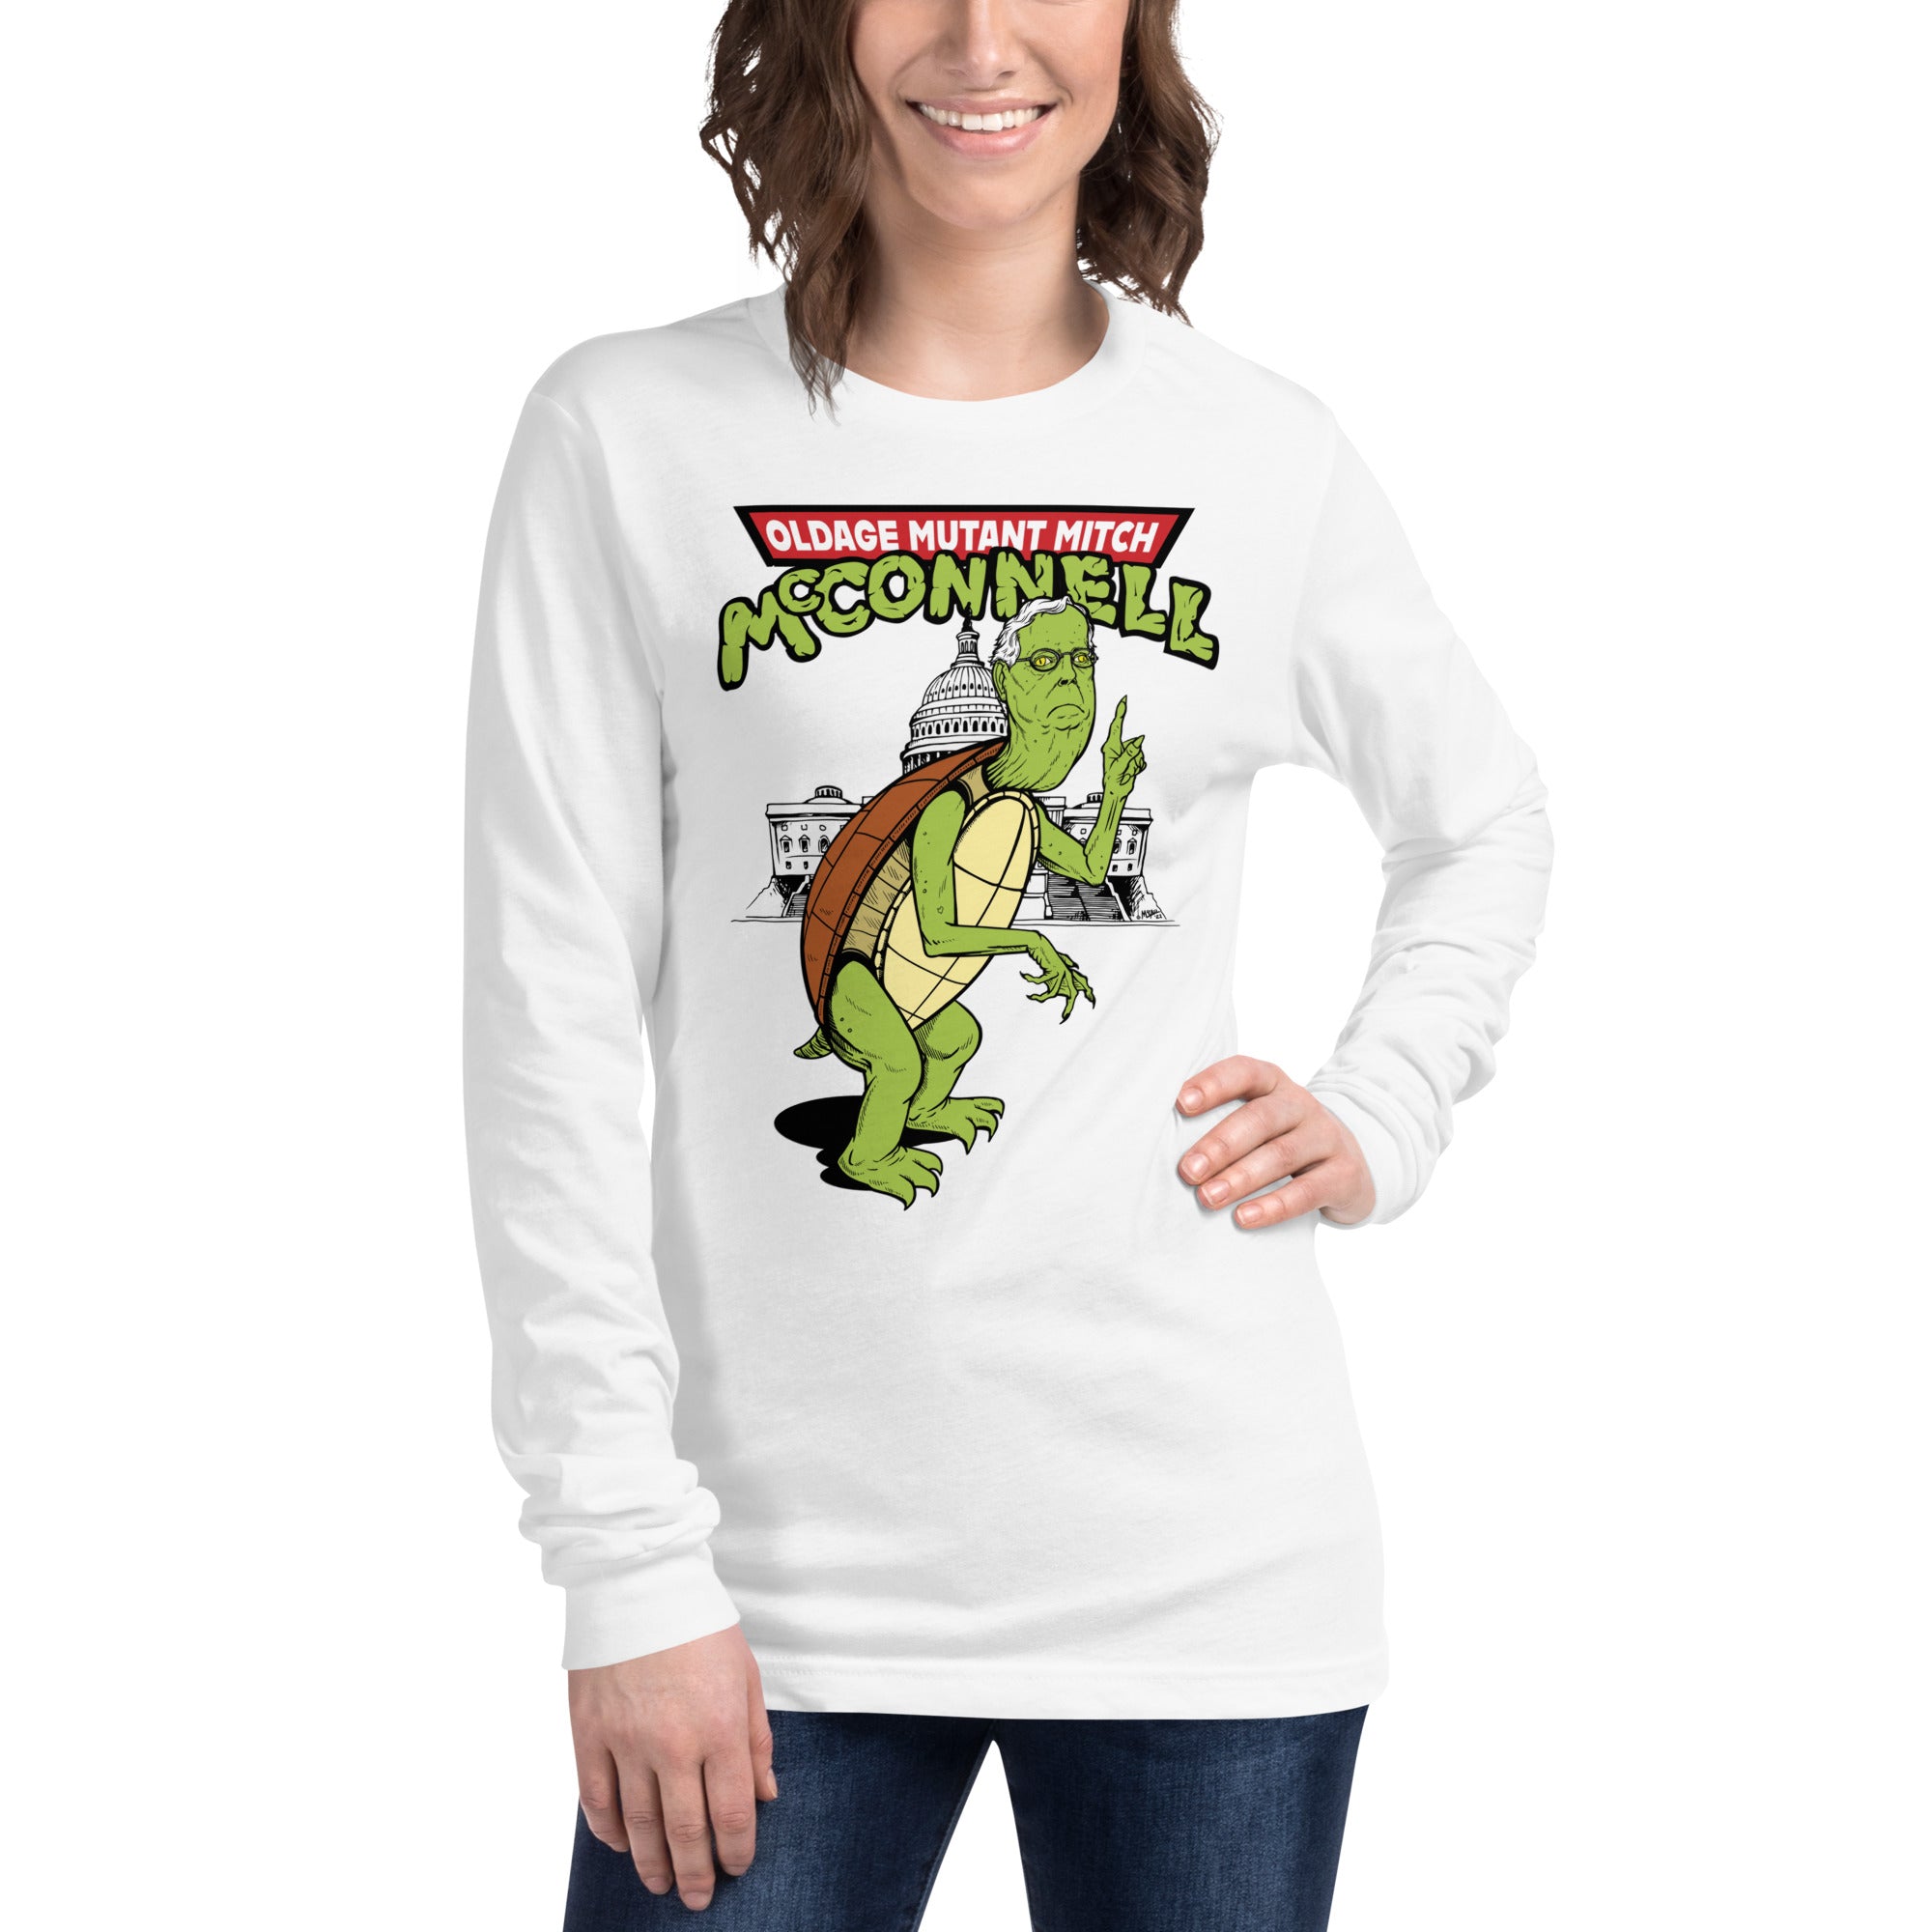 Old Age Mutant Mitch McConnell Long Sleeve Tee